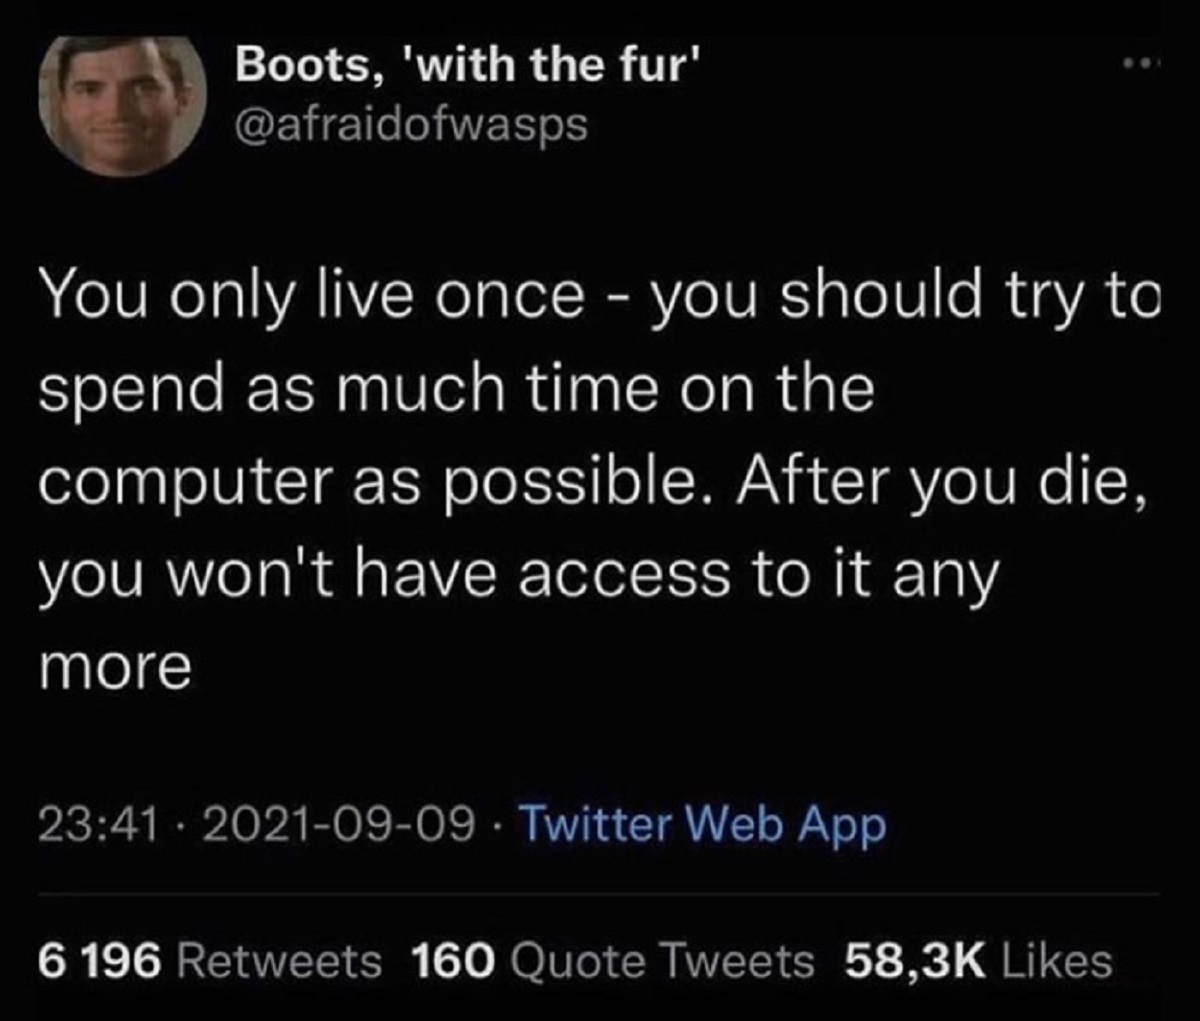 Boots, 'with the fur' You only live once you should try to spend as much time on the computer as possible. After you die, you won't have access to it any more Twitter Web App 6 196 160 Quote Tweets